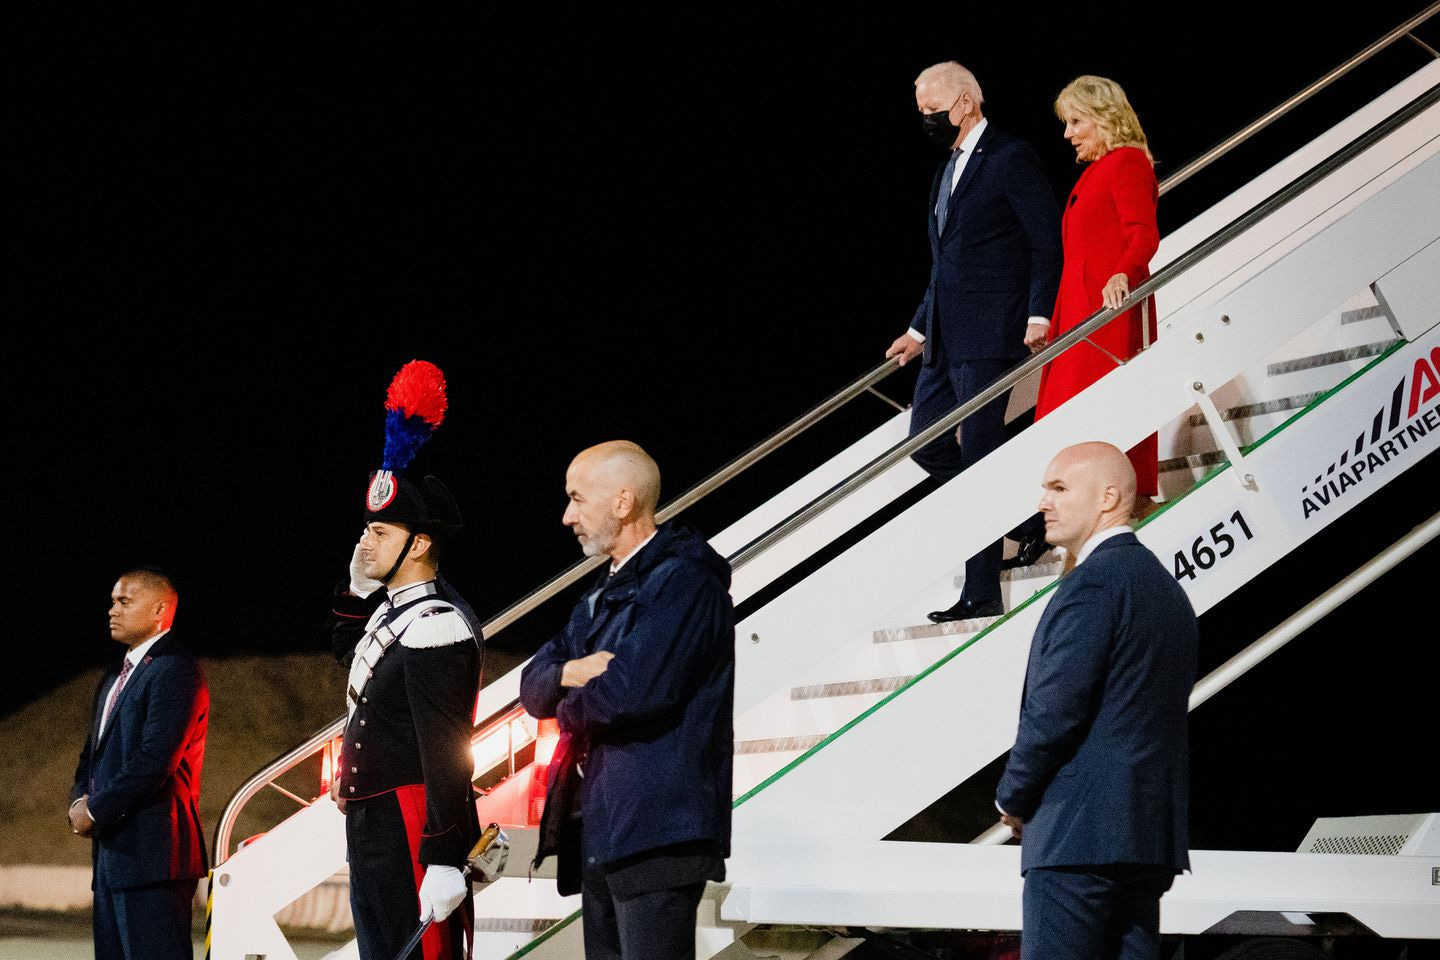 President Biden and first lady Jill Biden descended from Air Force One in Rome on Oct. 29, 2021.